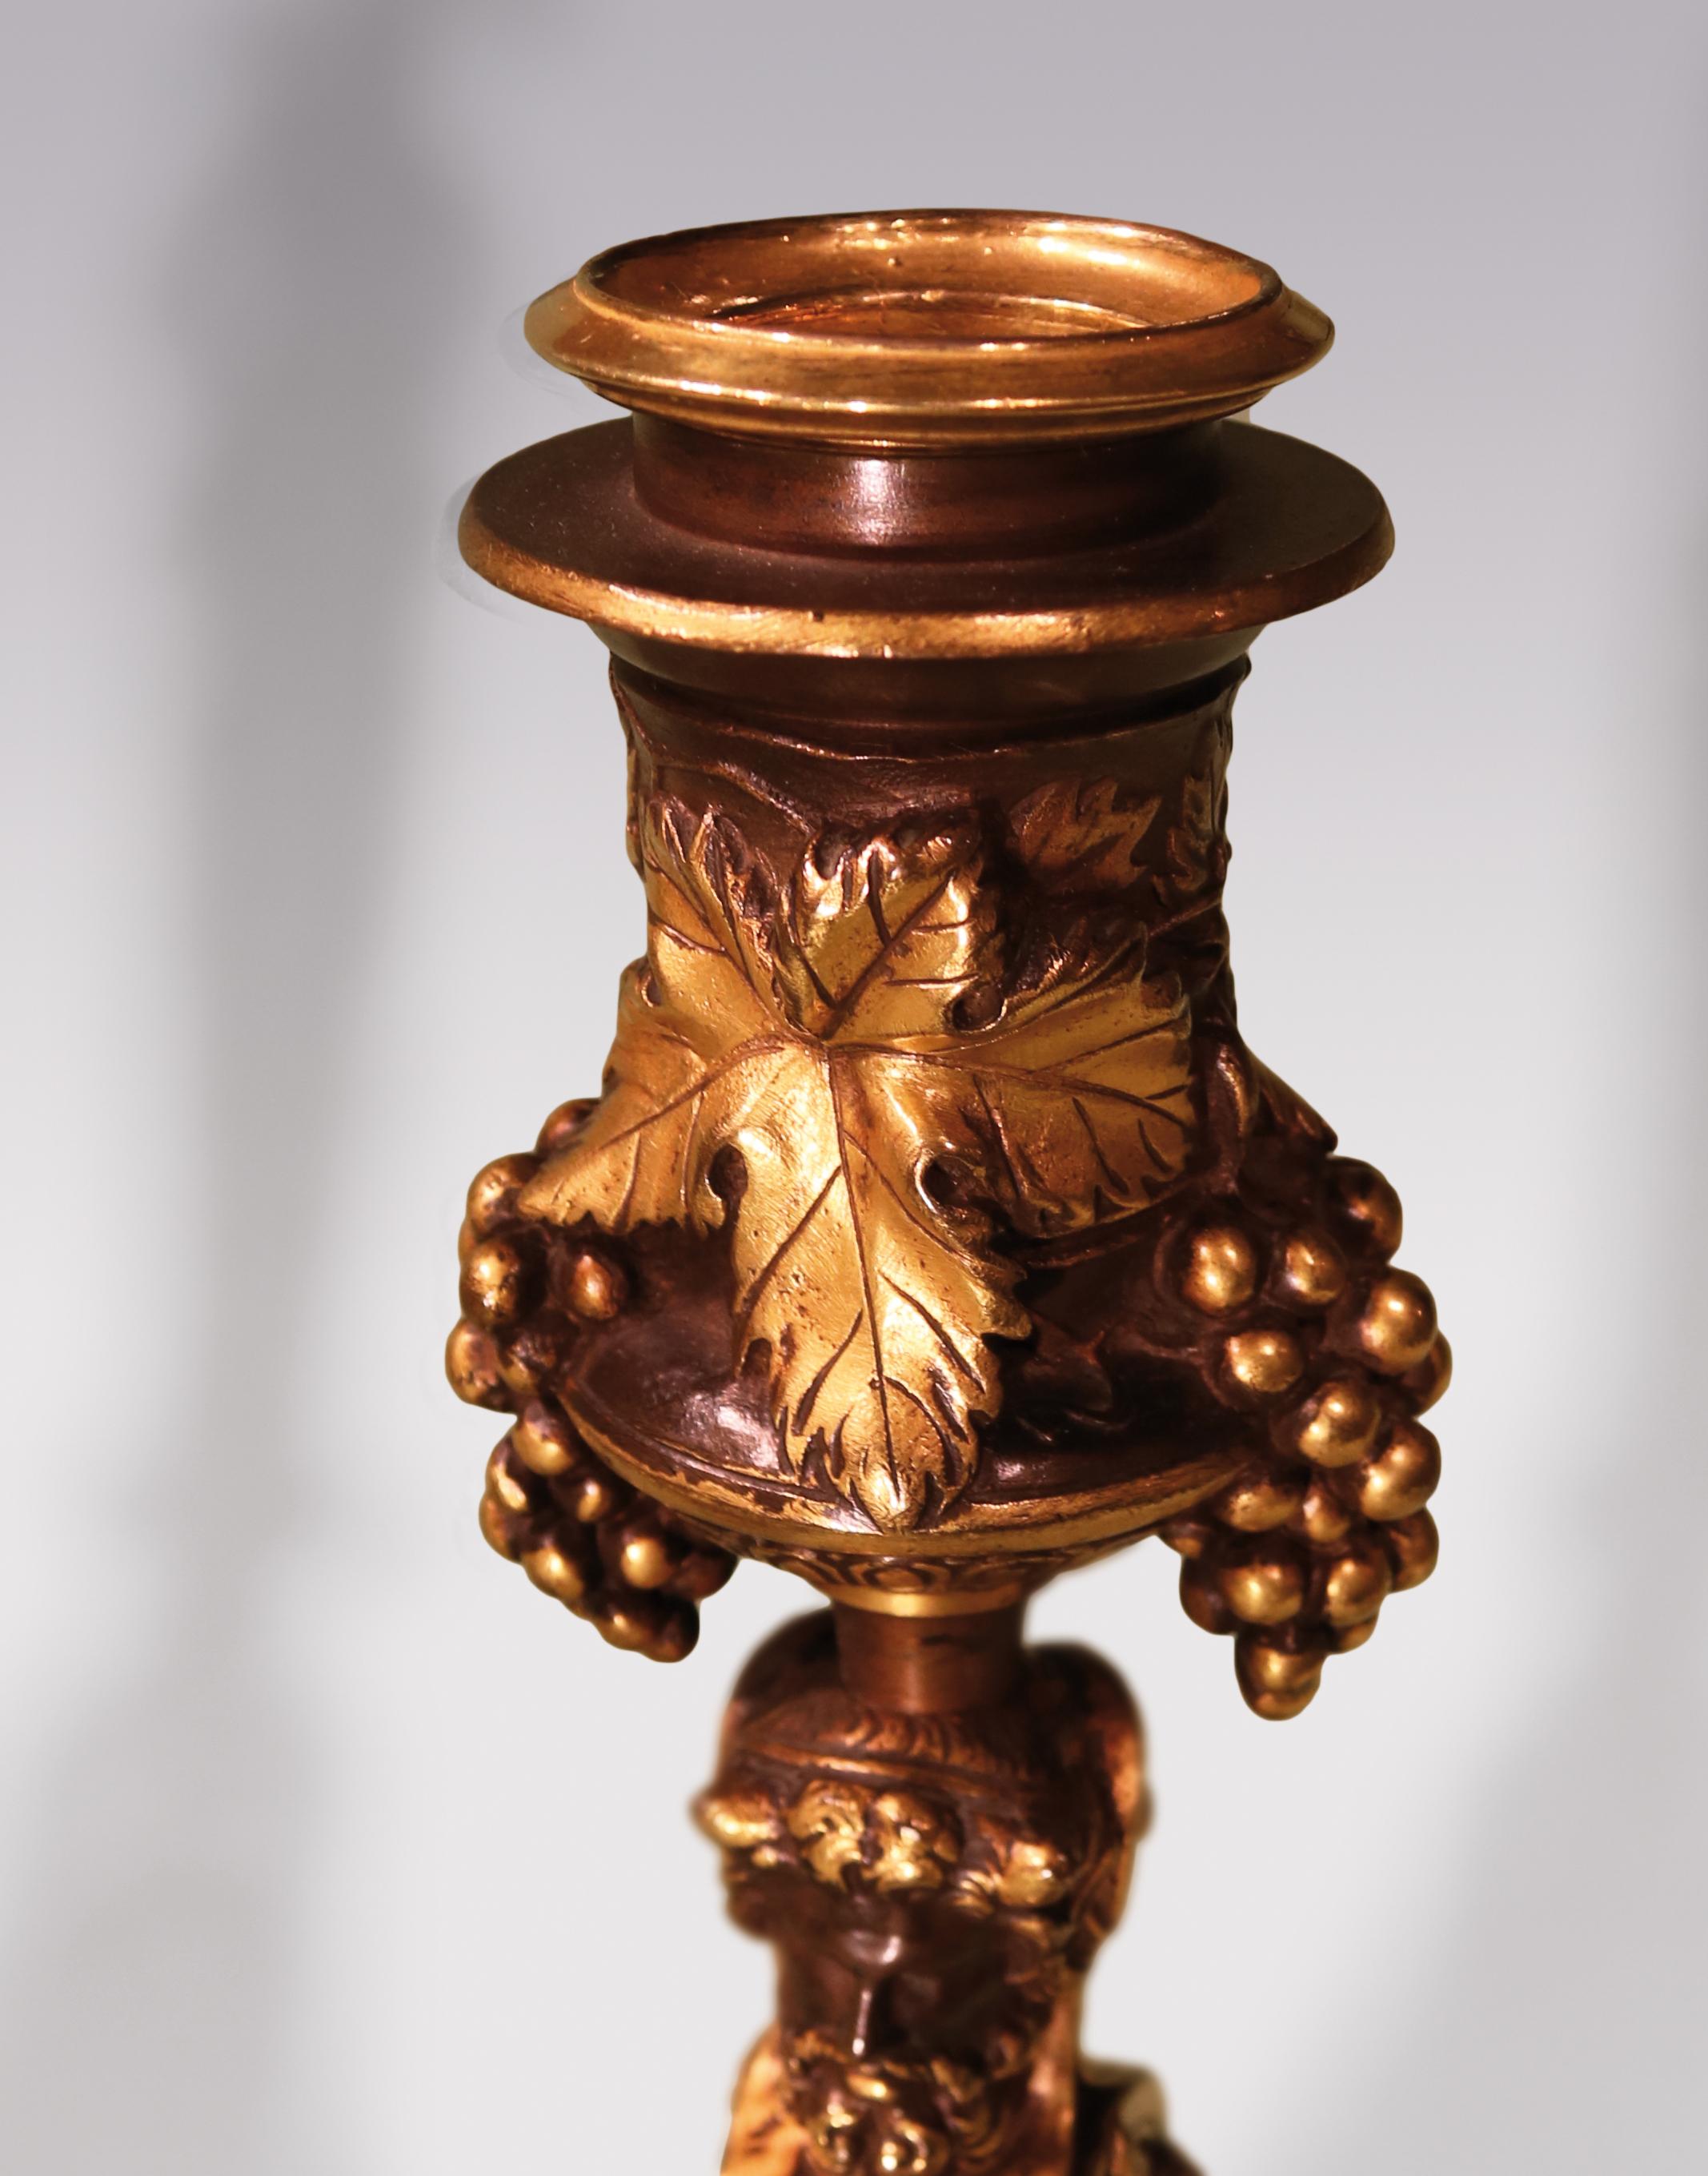 An unusual pair of mid-19th century French bronze and ormolu candlesticks, having grape and vine nozzles raised on swaged, fluted tapering stems surmounted by classical busts of man and woman, ending on decorated and beaded circular bases. Signed F.